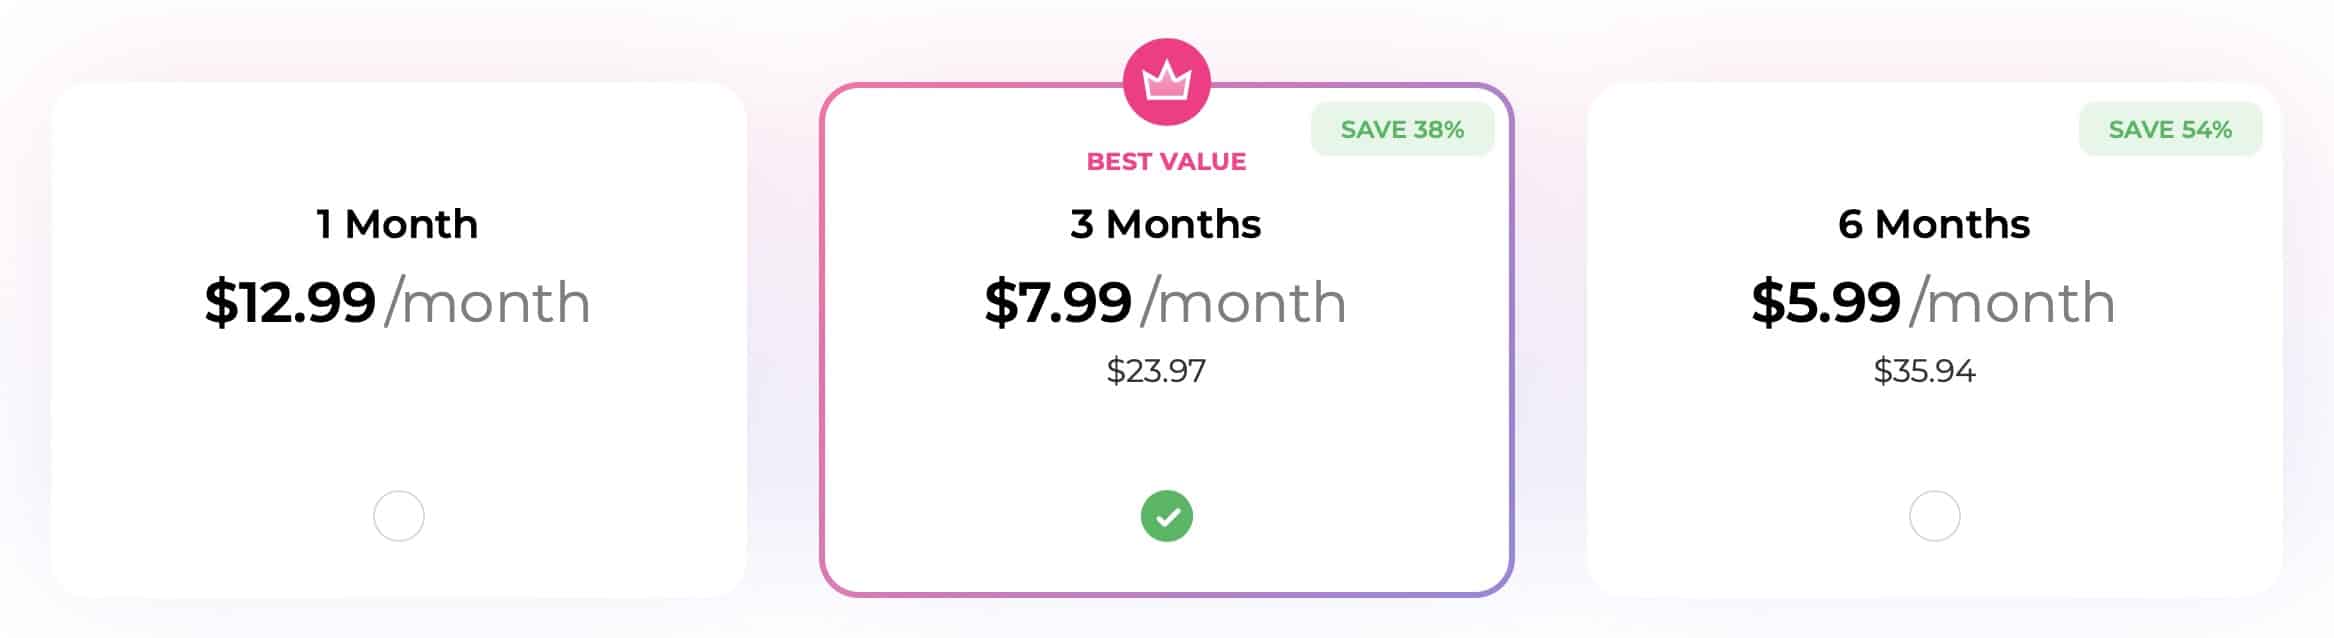 ClearVPN - Pricing